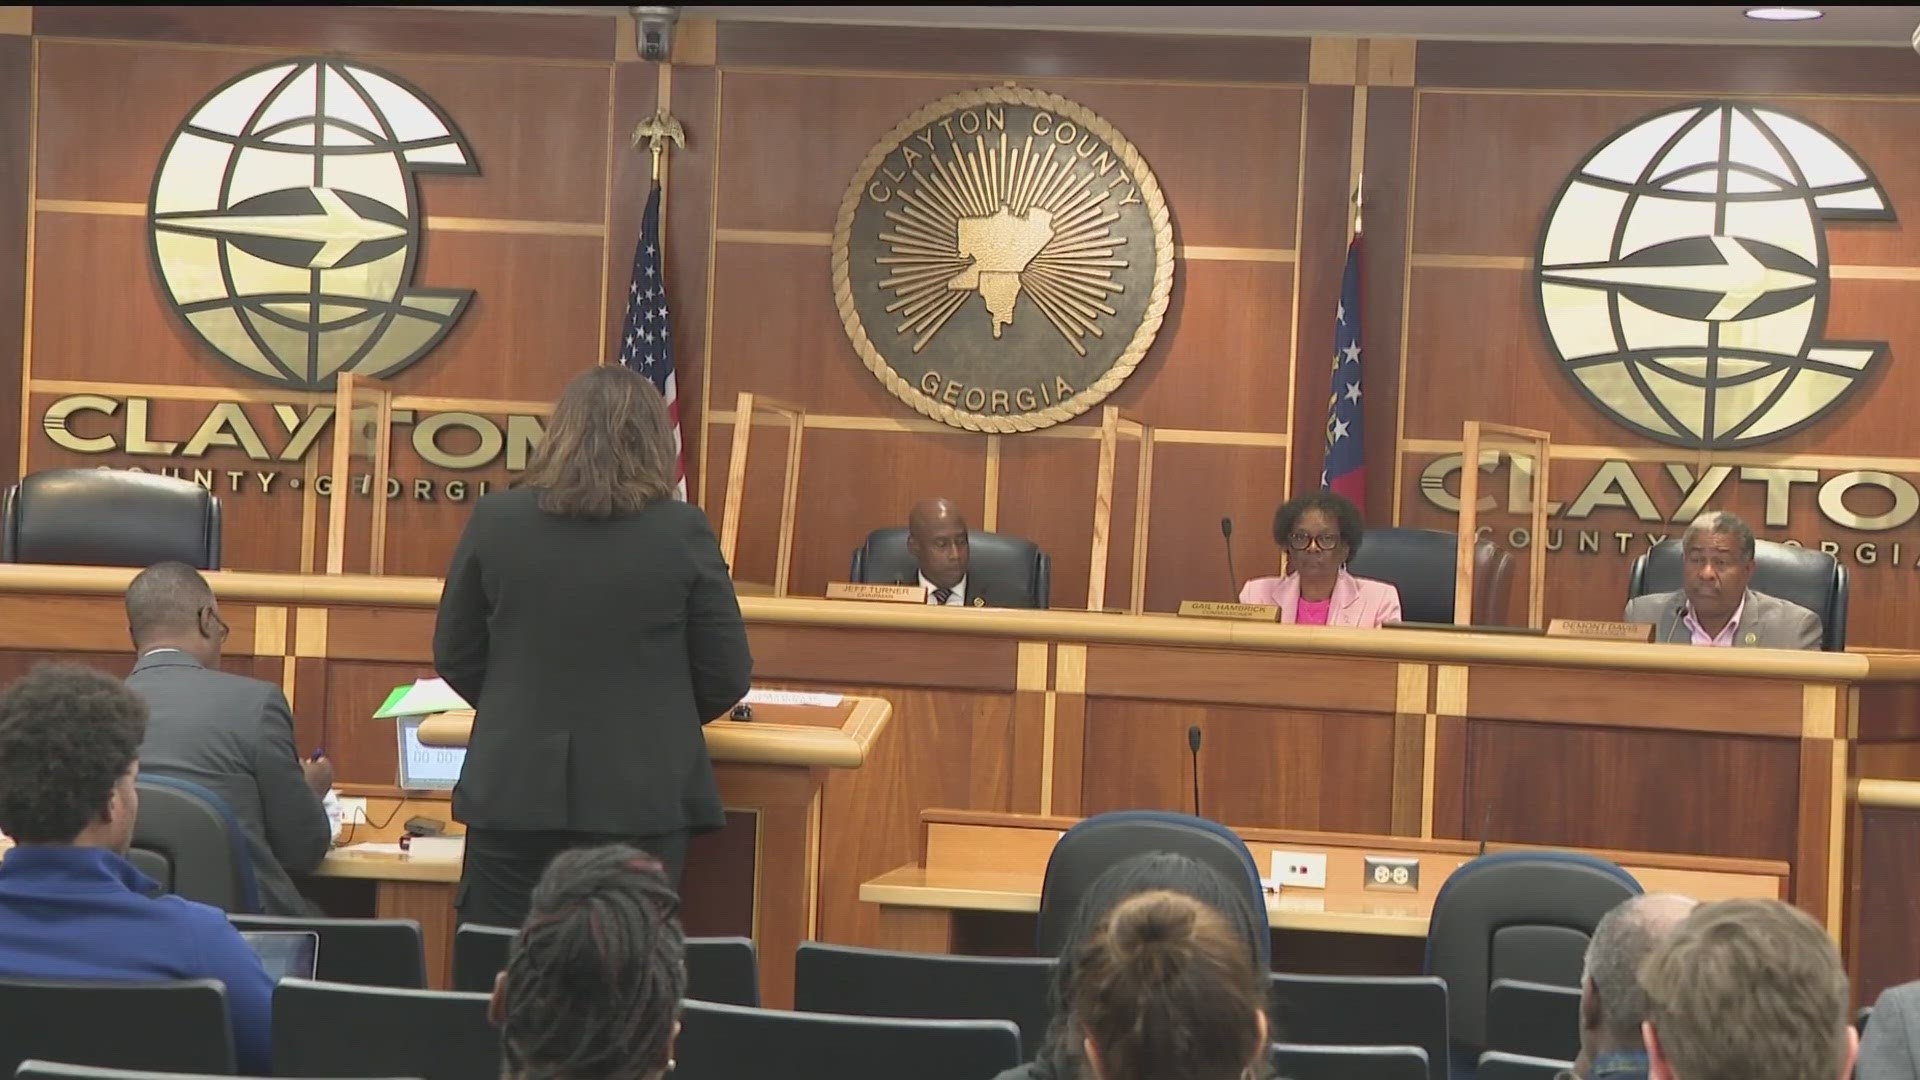 Clayton County commissioners rejected a funding plan Tuesday evening to make improvements inside the Clayton County Jail.